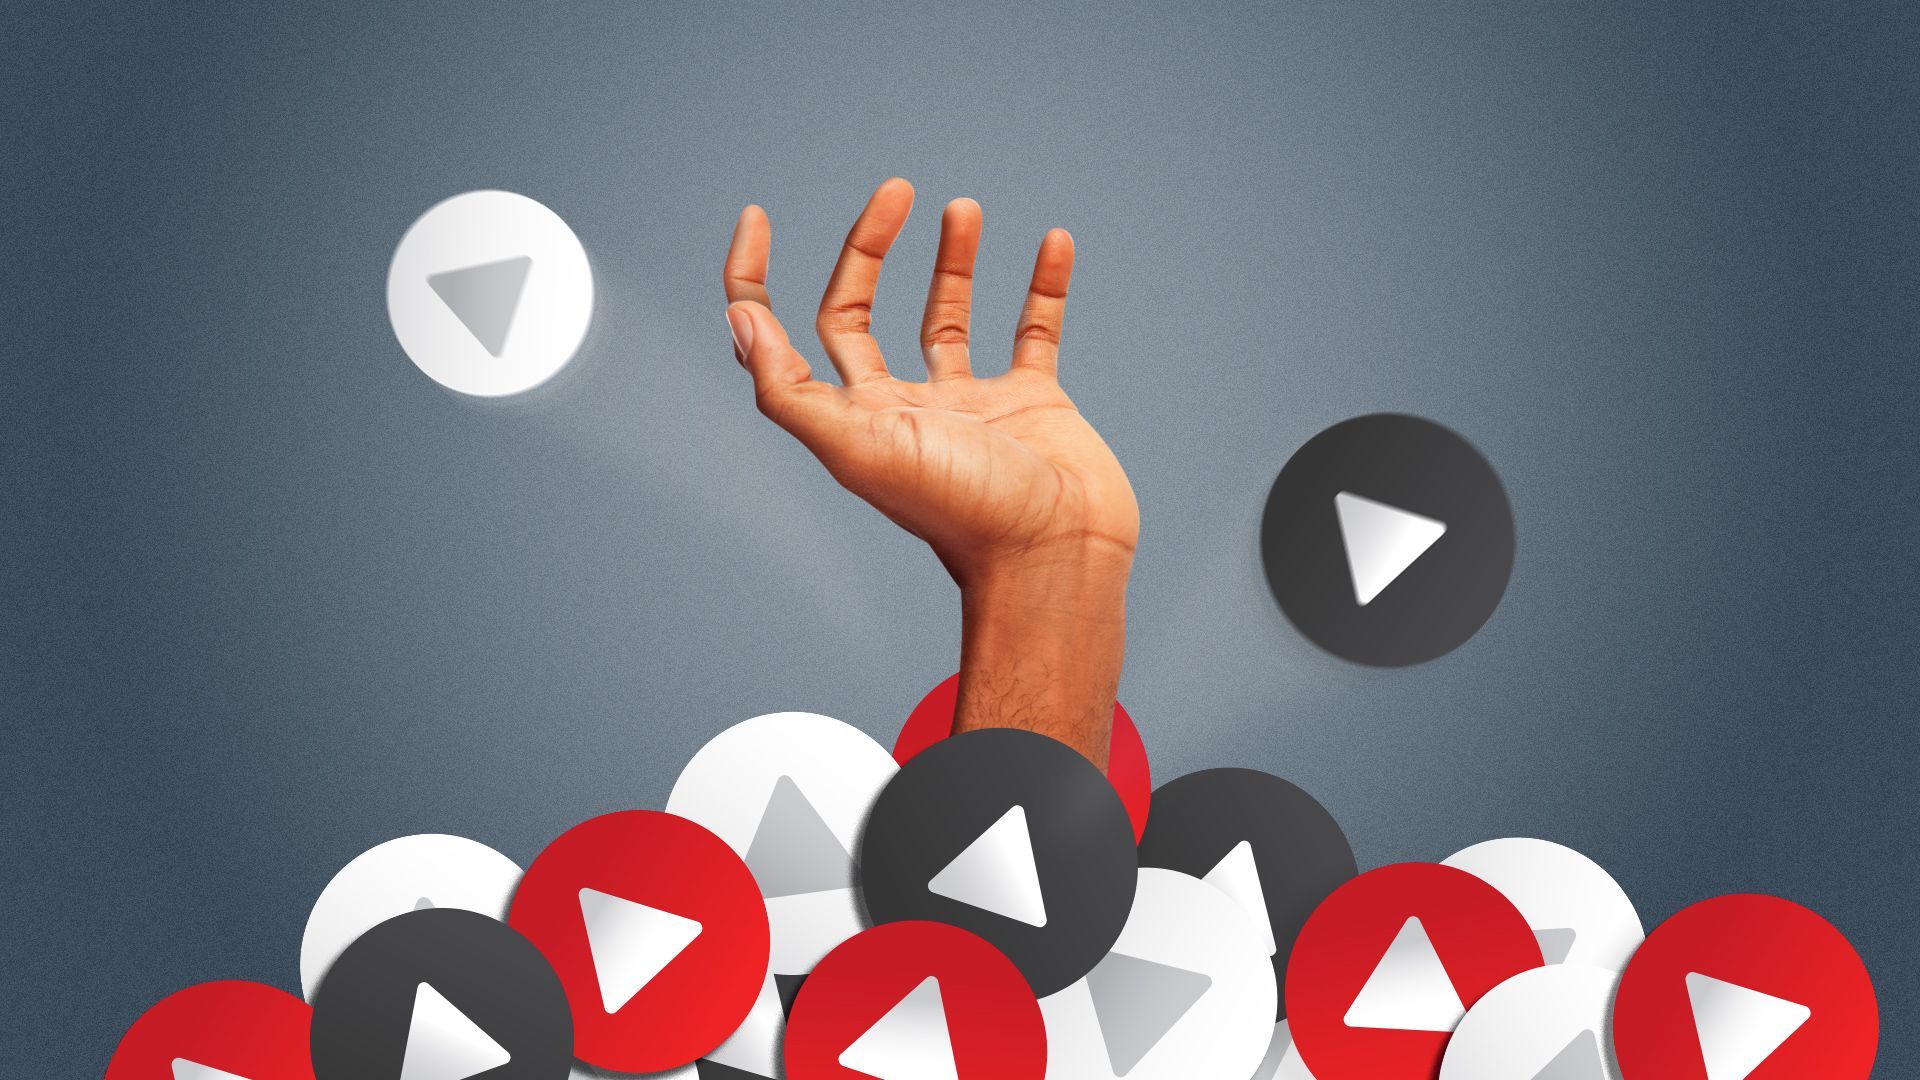 Illustration of a hand reaching out for help from a pile of play buttons. 